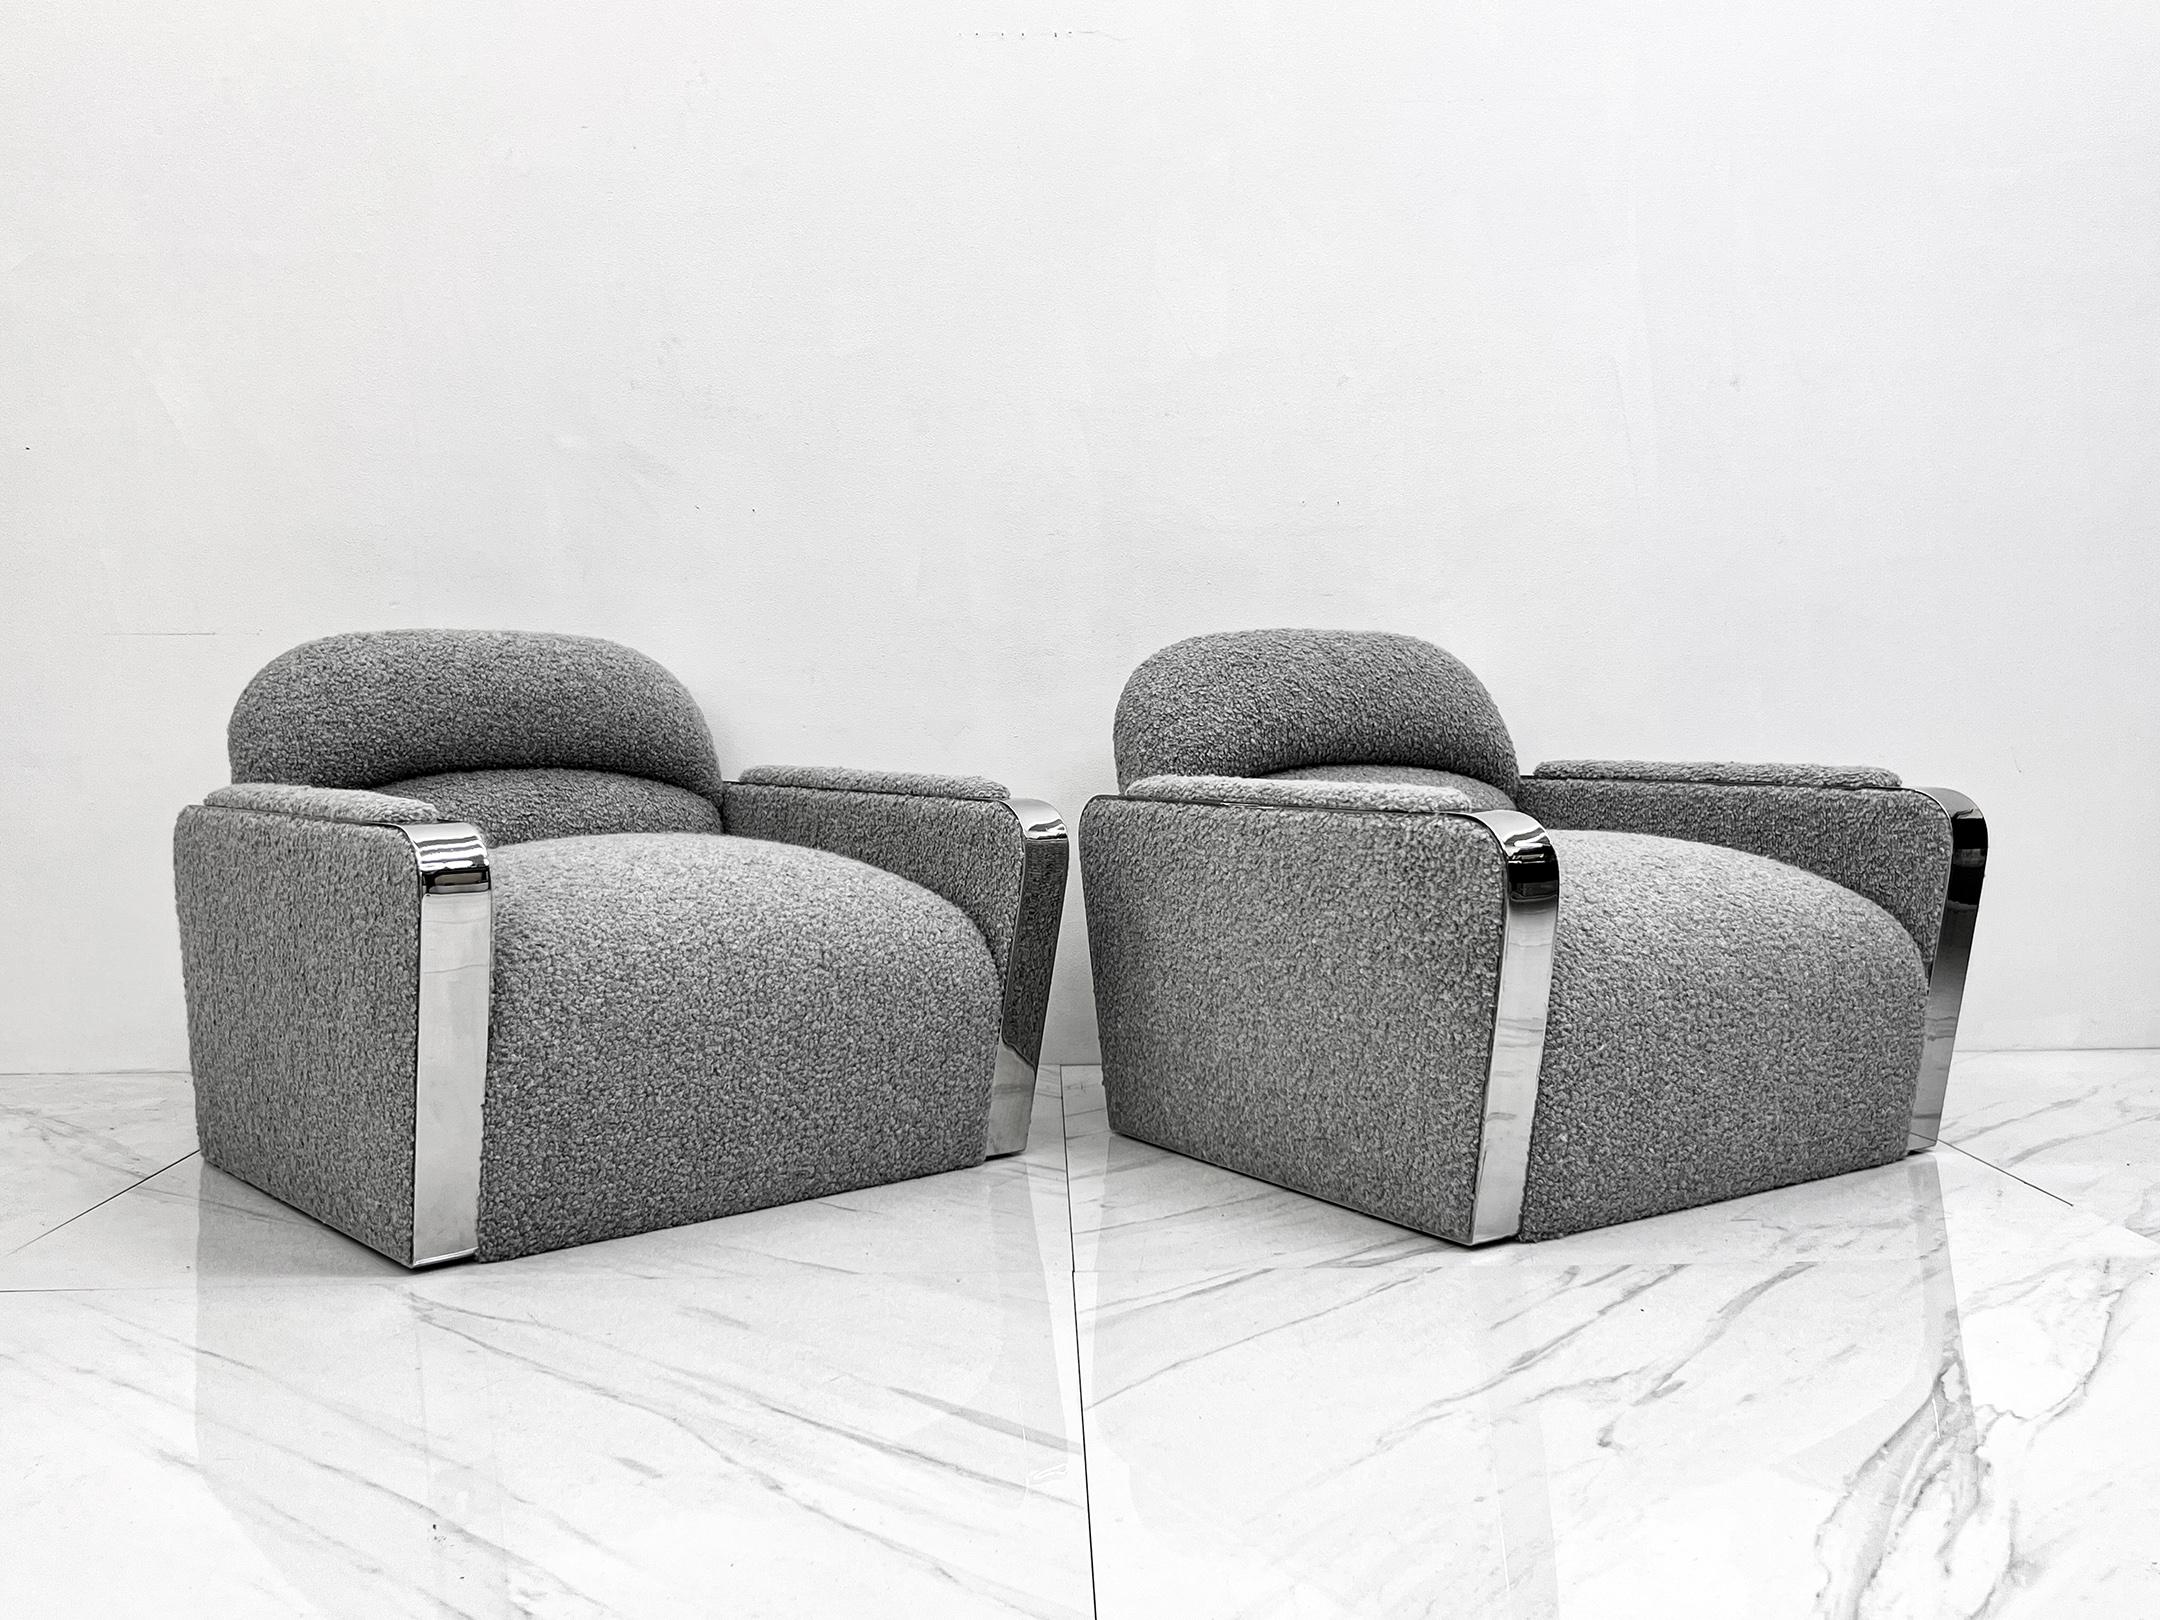 Lounge Chairs by Stanley Jay Friedman for Brueton, Gray Boucle, 1980's, a Pair In Good Condition For Sale In Culver City, CA